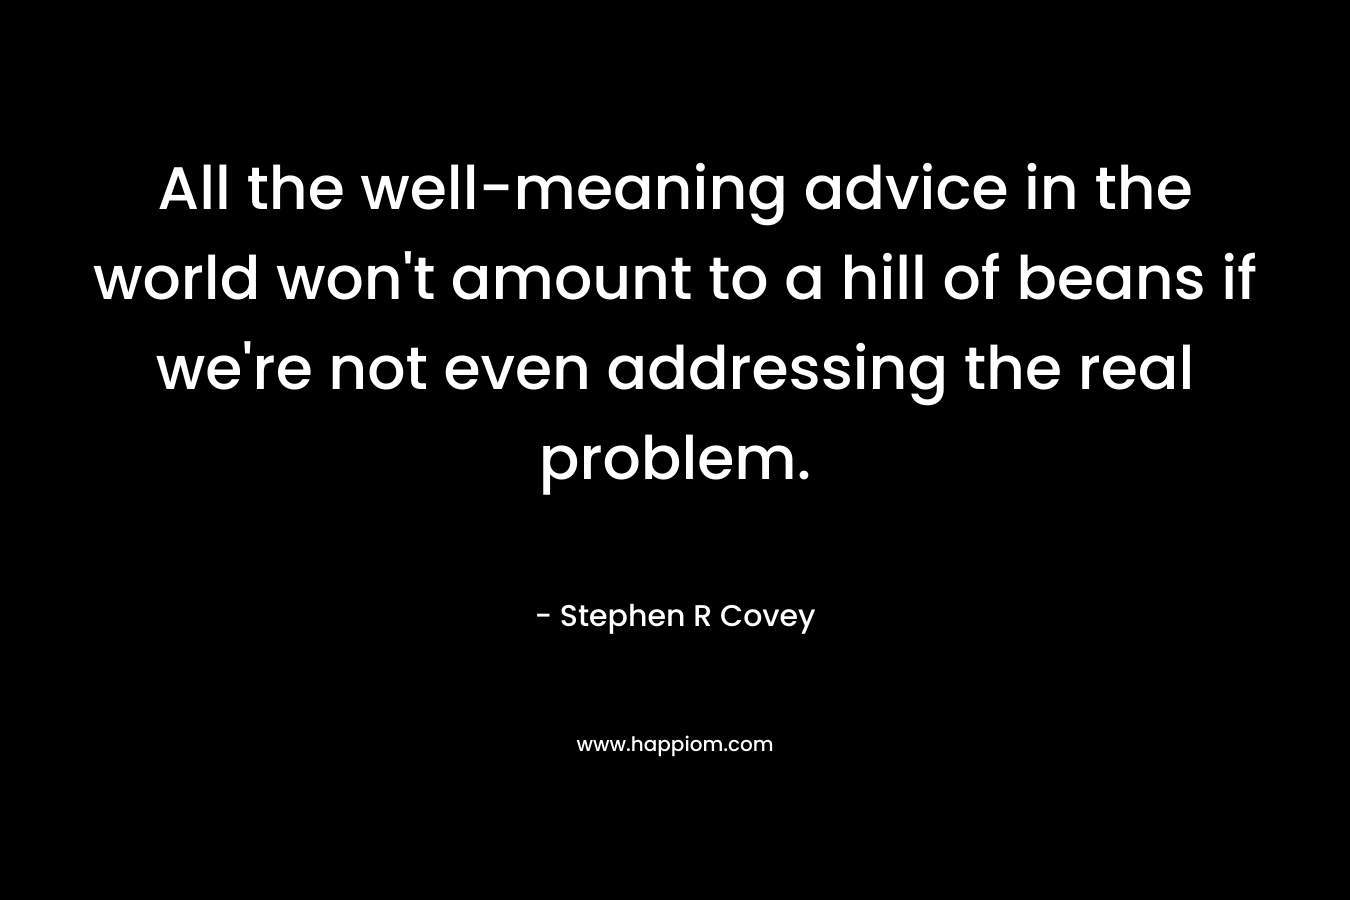 All the well-meaning advice in the world won’t amount to a hill of beans if we’re not even addressing the real problem. – Stephen R Covey